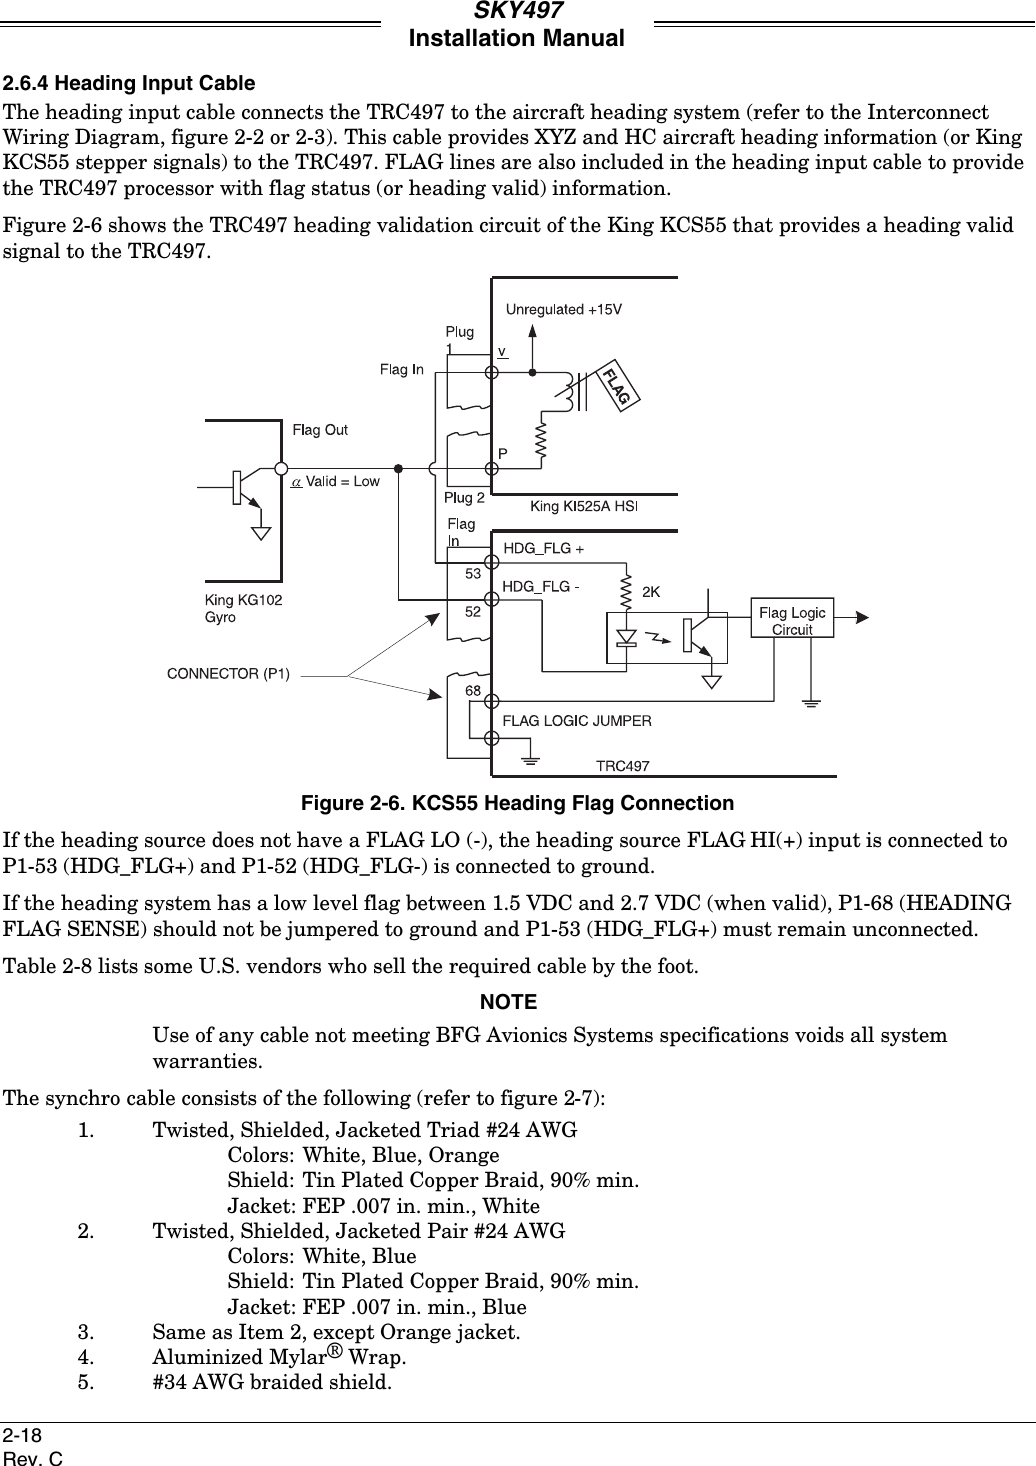 SKY497Installation Manual2-18Rev. C2.6.4 Heading Input CableThe heading input cable connects the TRC497 to the aircraft heading system (refer to the InterconnectWiring Diagram, figure 2-2 or 2-3). This cable provides XYZ and HC aircraft heading information (or KingKCS55 stepper signals) to the TRC497. FLAG lines are also included in the heading input cable to providethe TRC497 processor with flag status (or heading valid) information.Figure 2-6 shows the TRC497 heading validation circuit of the King KCS55 that provides a heading validsignal to the TRC497.Figure 2-6. KCS55 Heading Flag ConnectionIf the heading source does not have a FLAG LO (-), the heading source FLAG HI(+) input is connected toP1-53 (HDG_FLG+) and P1-52 (HDG_FLG-) is connected to ground.If the heading system has a low level flag between 1.5 VDC and 2.7 VDC (when valid), P1-68 (HEADINGFLAG SENSE) should not be jumpered to ground and P1-53 (HDG_FLG+) must remain unconnected.Table 2-8 lists some U.S. vendors who sell the required cable by the foot.NOTEUse of any cable not meeting BFG Avionics Systems specifications voids all systemwarranties.The synchro cable consists of the following (refer to figure 2-7):1. Twisted, Shielded, Jacketed Triad #24 AWGColors: White, Blue, OrangeShield: Tin Plated Copper Braid, 90% min.Jacket: FEP .007 in. min., White2. Twisted, Shielded, Jacketed Pair #24 AWGColors: White, BlueShield: Tin Plated Copper Braid, 90% min.Jacket: FEP .007 in. min., Blue3. Same as Item 2, except Orange jacket.4. Aluminized Mylar® Wrap.5. #34 AWG braided shield.